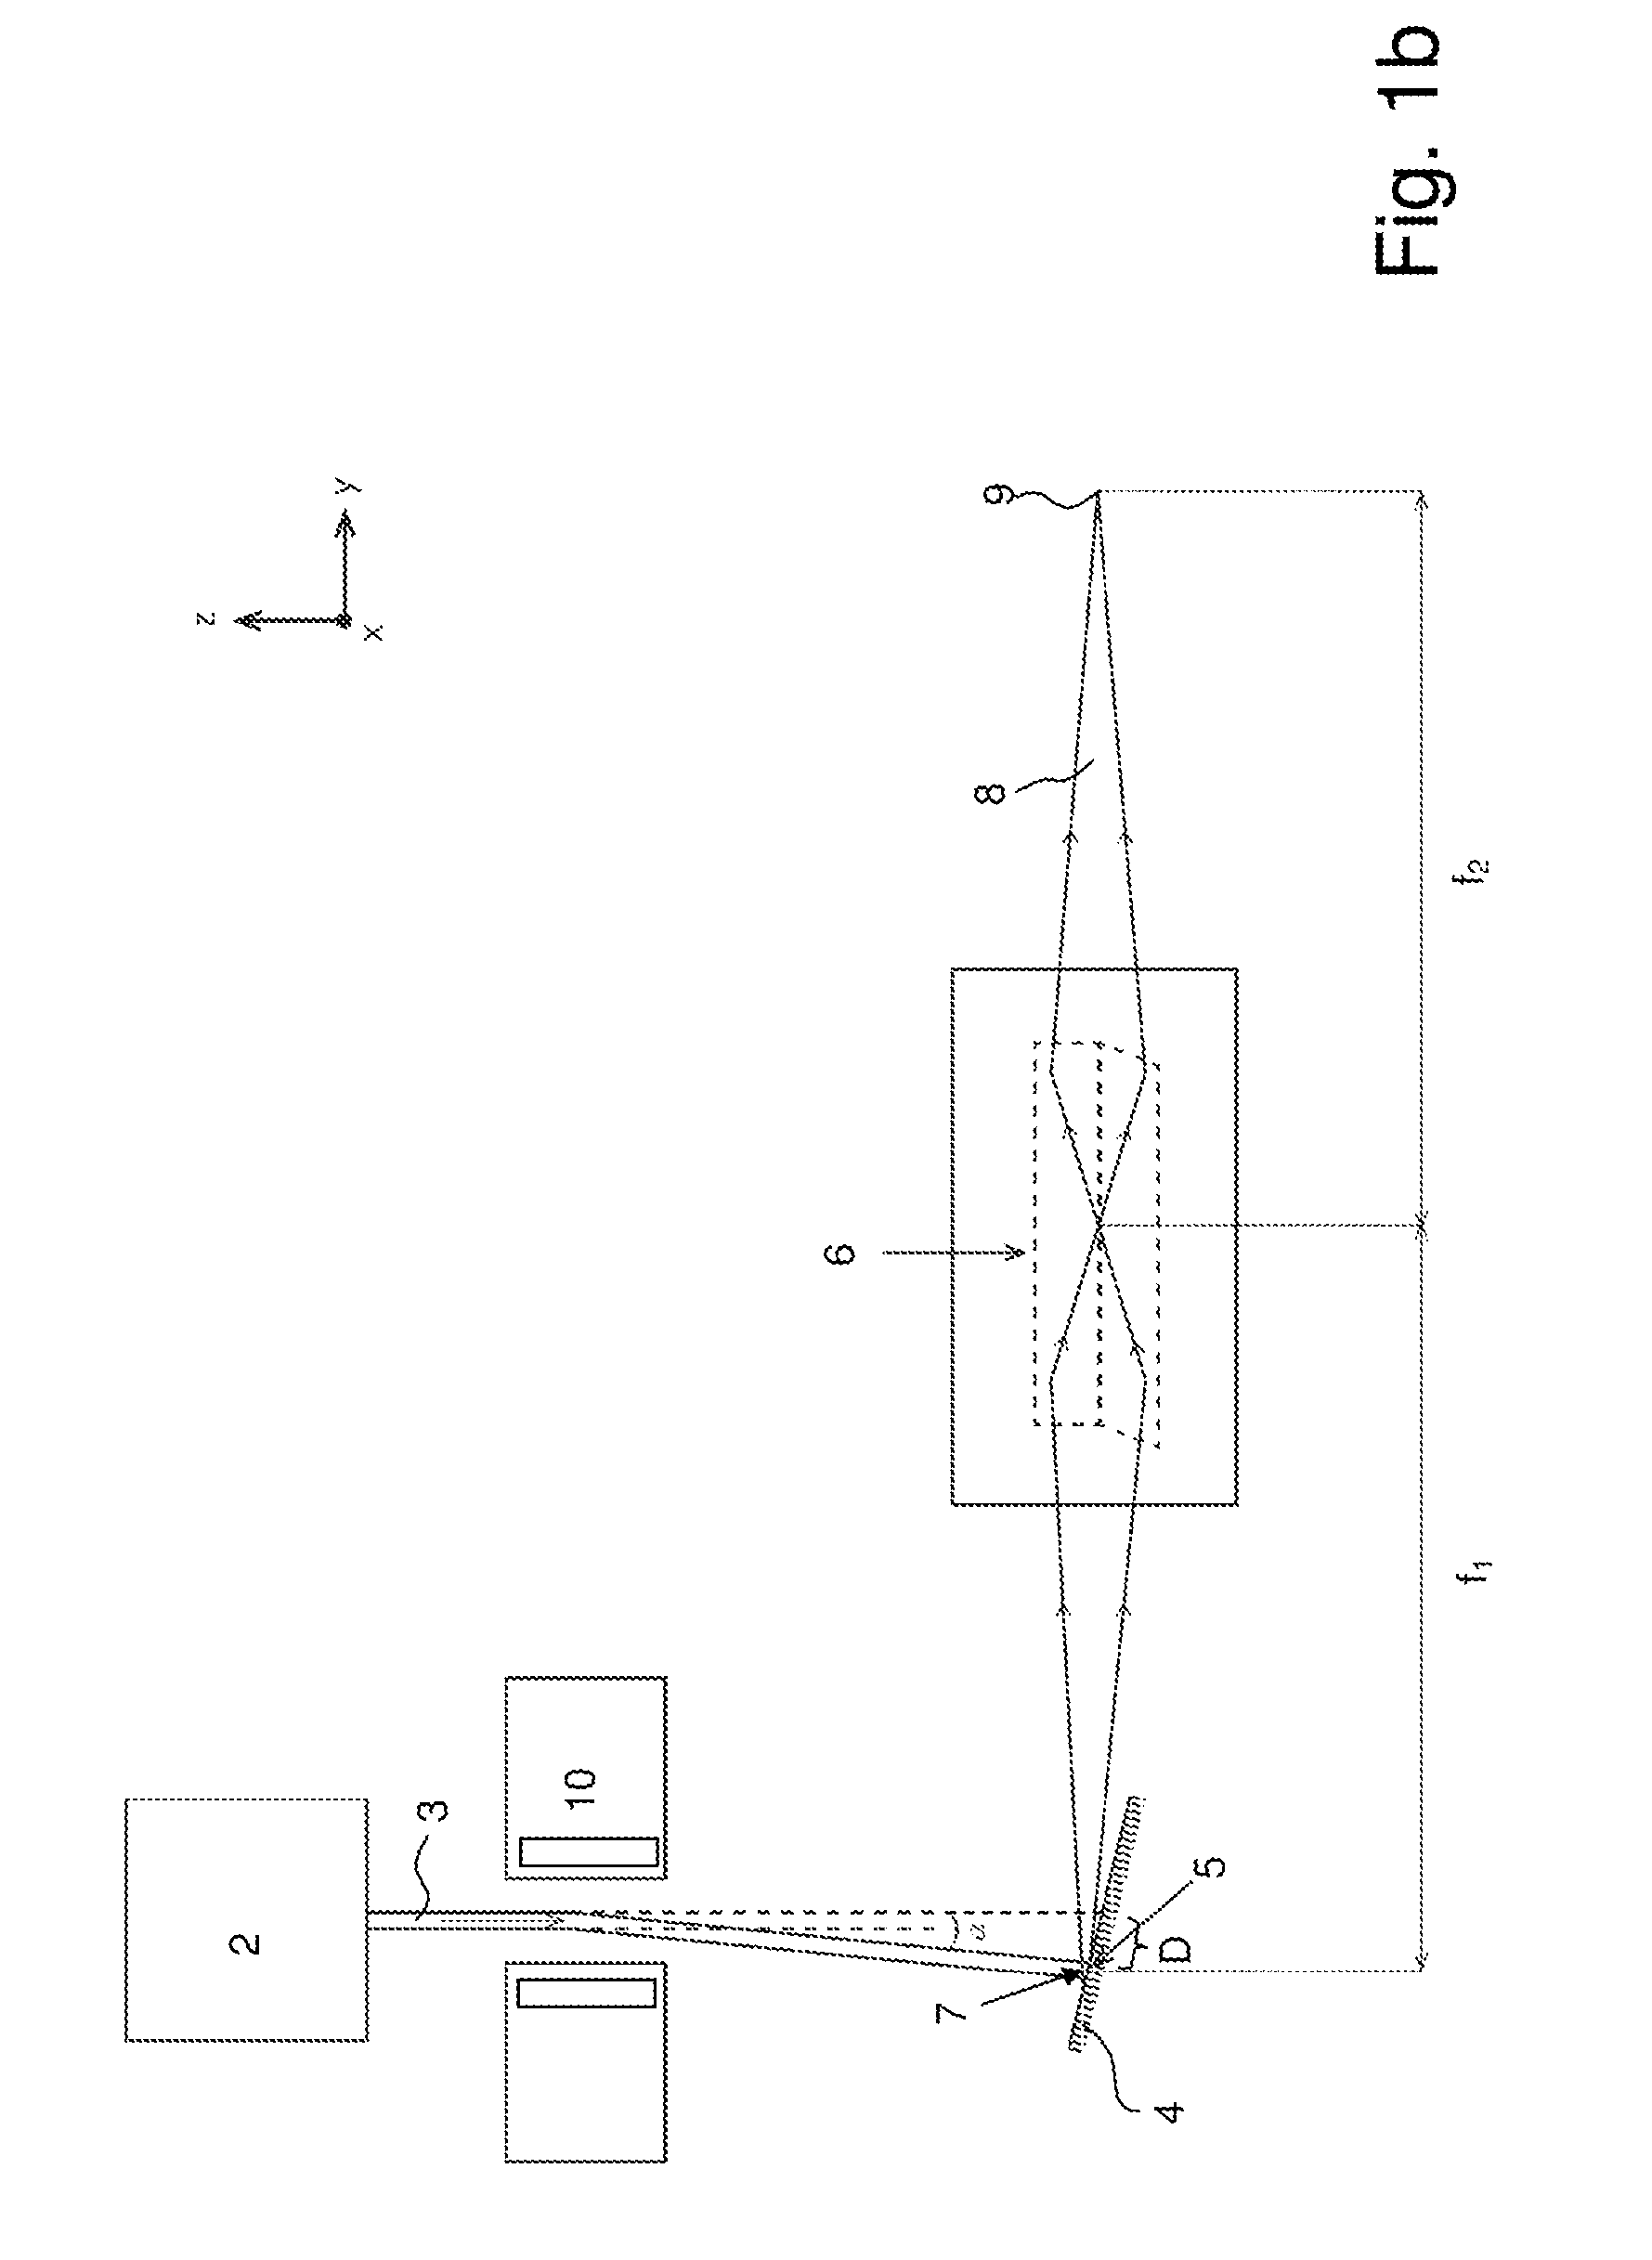 X-ray apparatus with deflectable electron beam